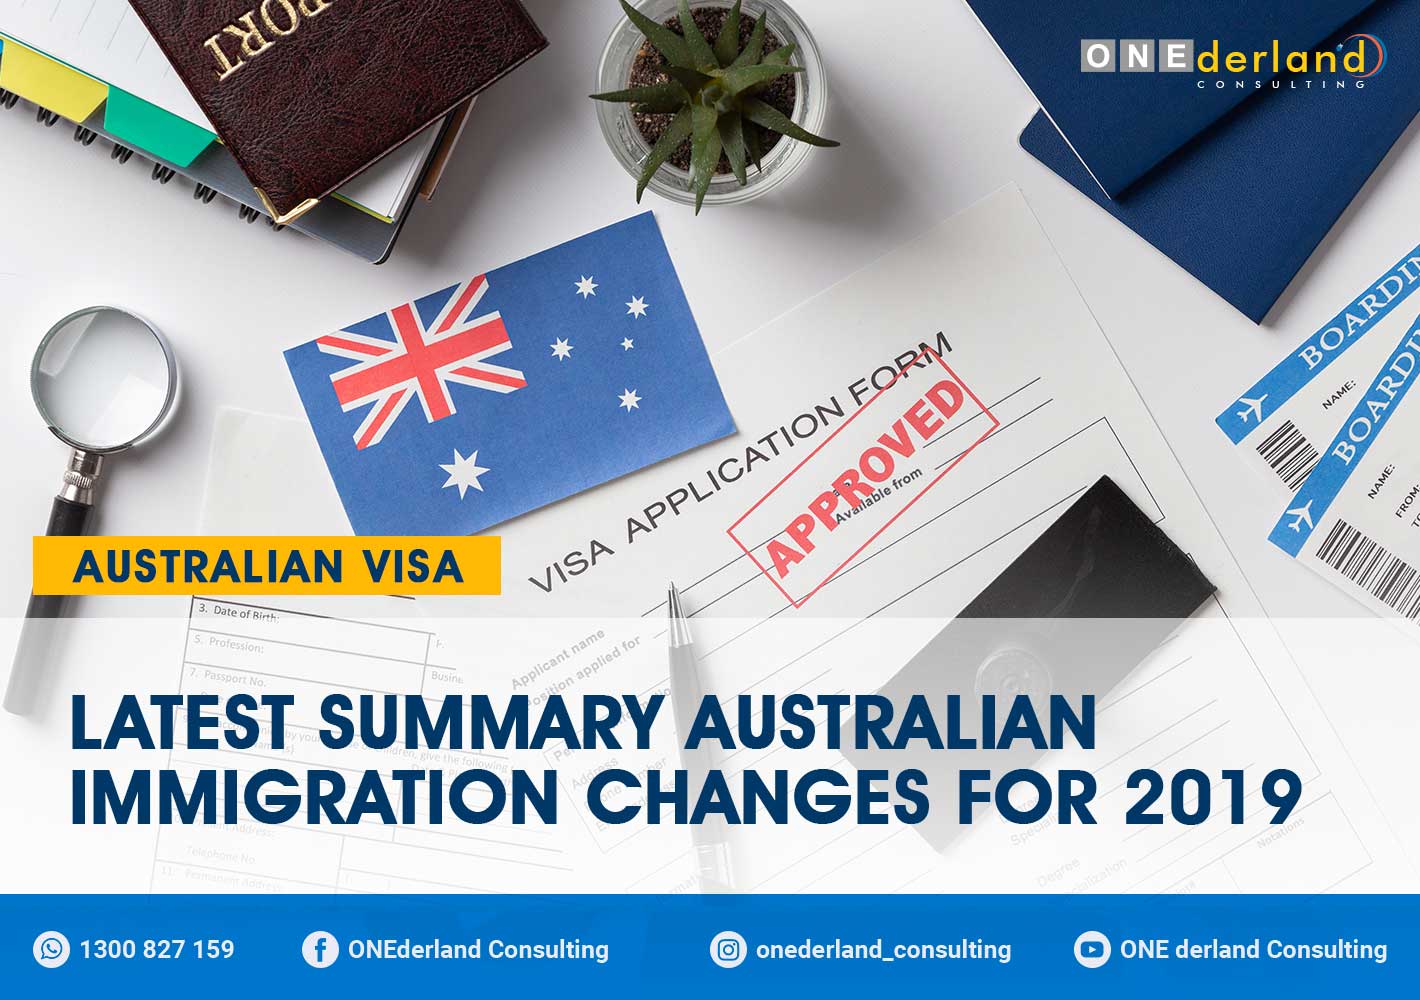 Latest Summary Australian Immigration Changes for 2019